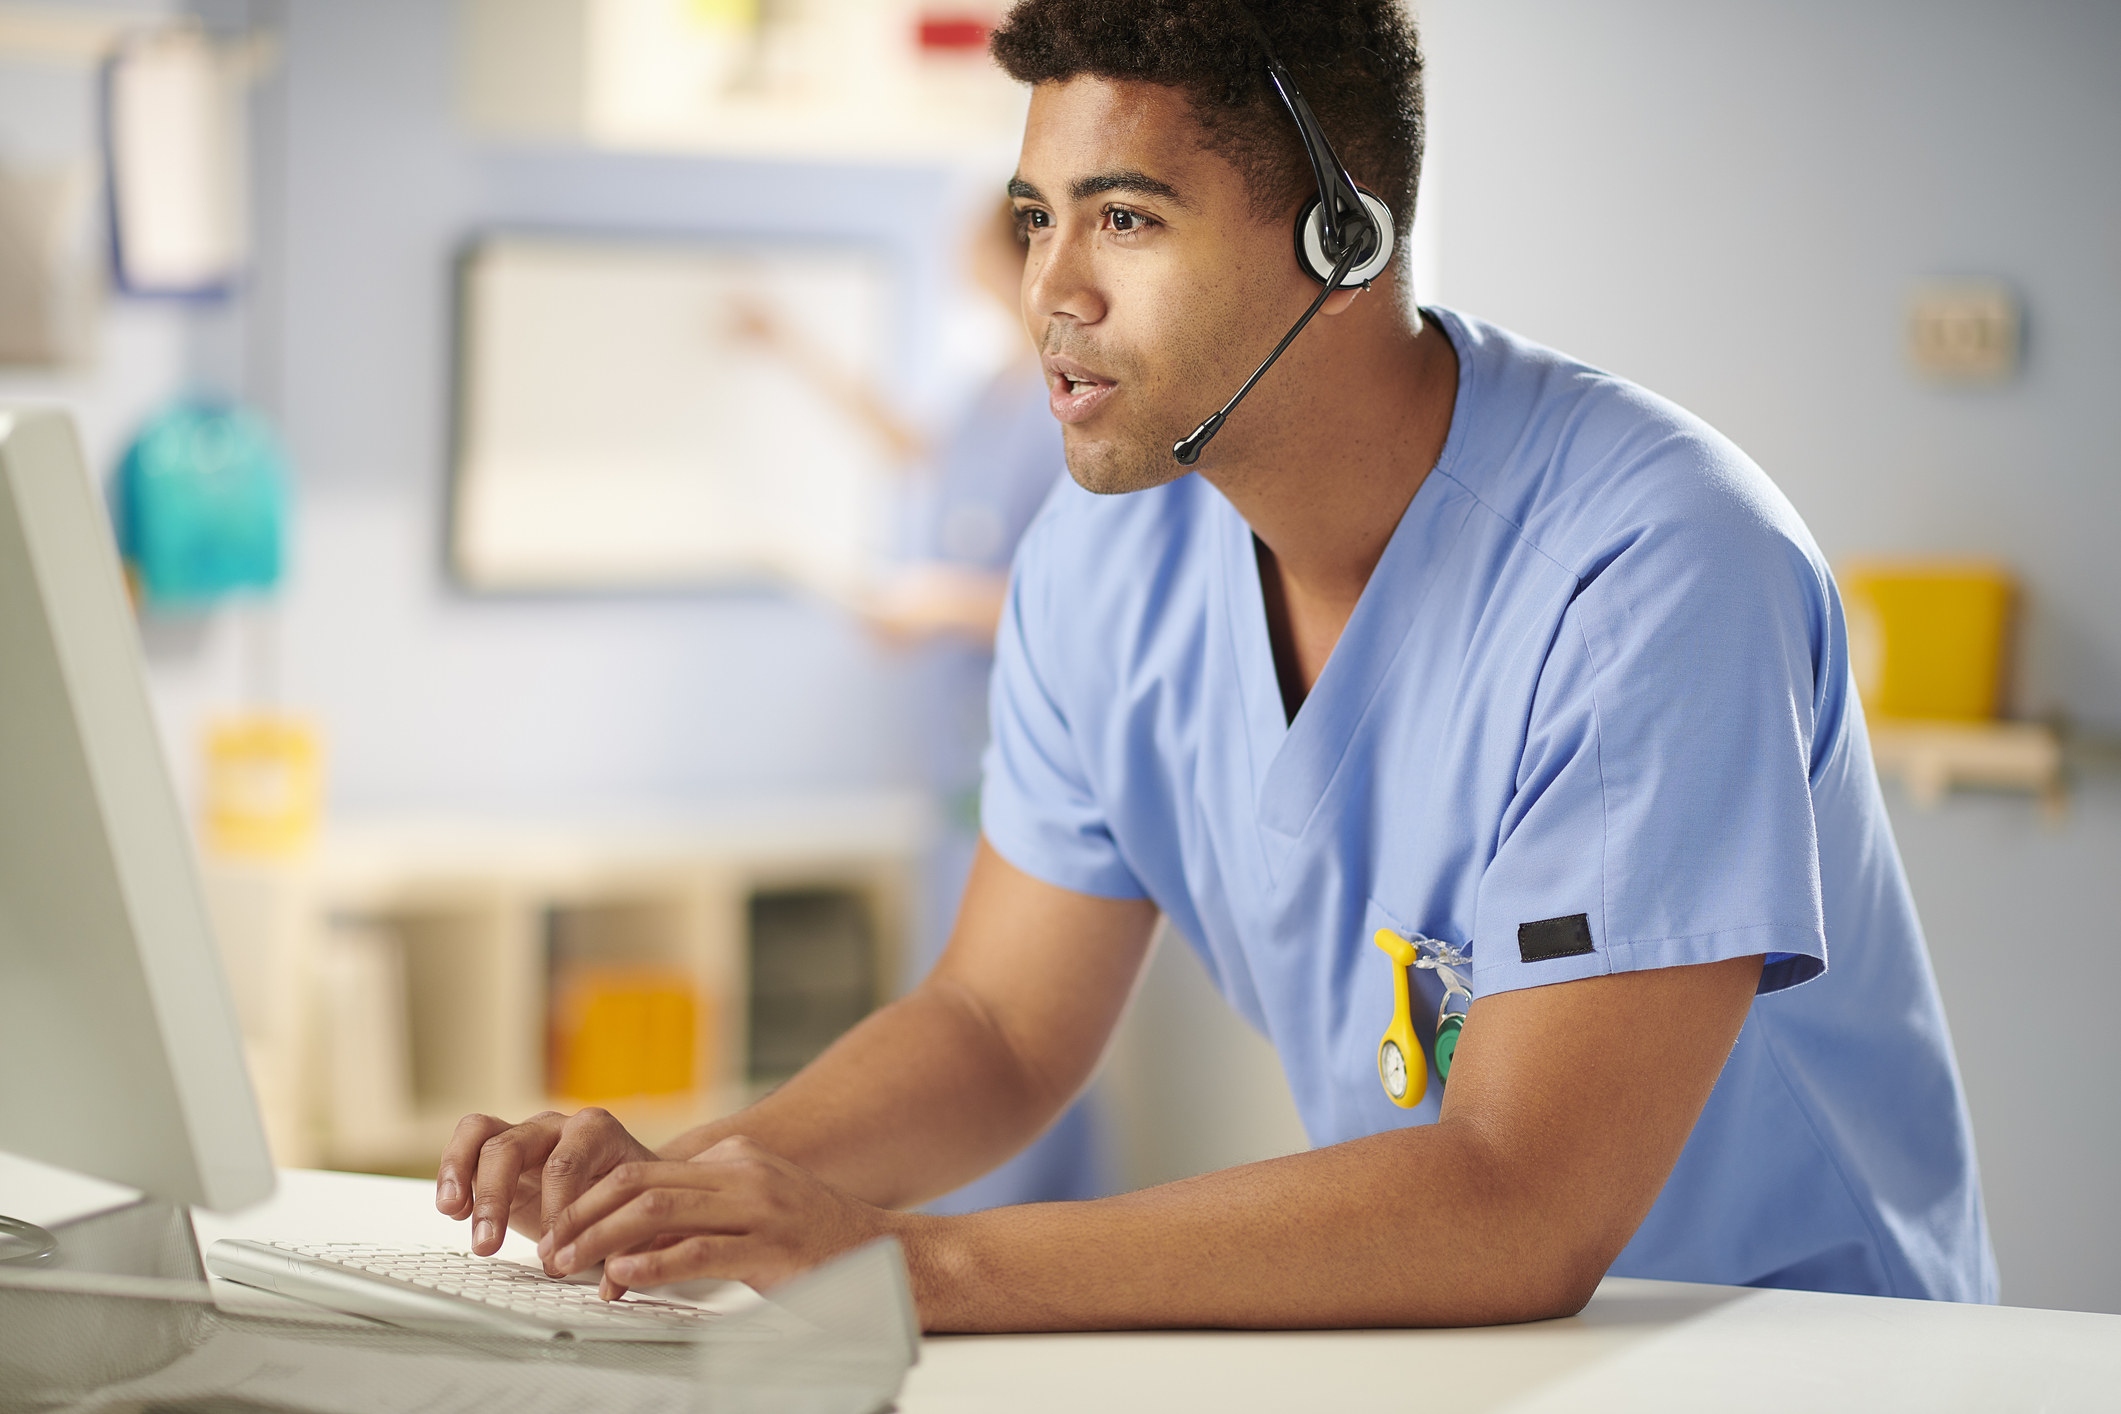 a medical worker on the phone and typing on a computer